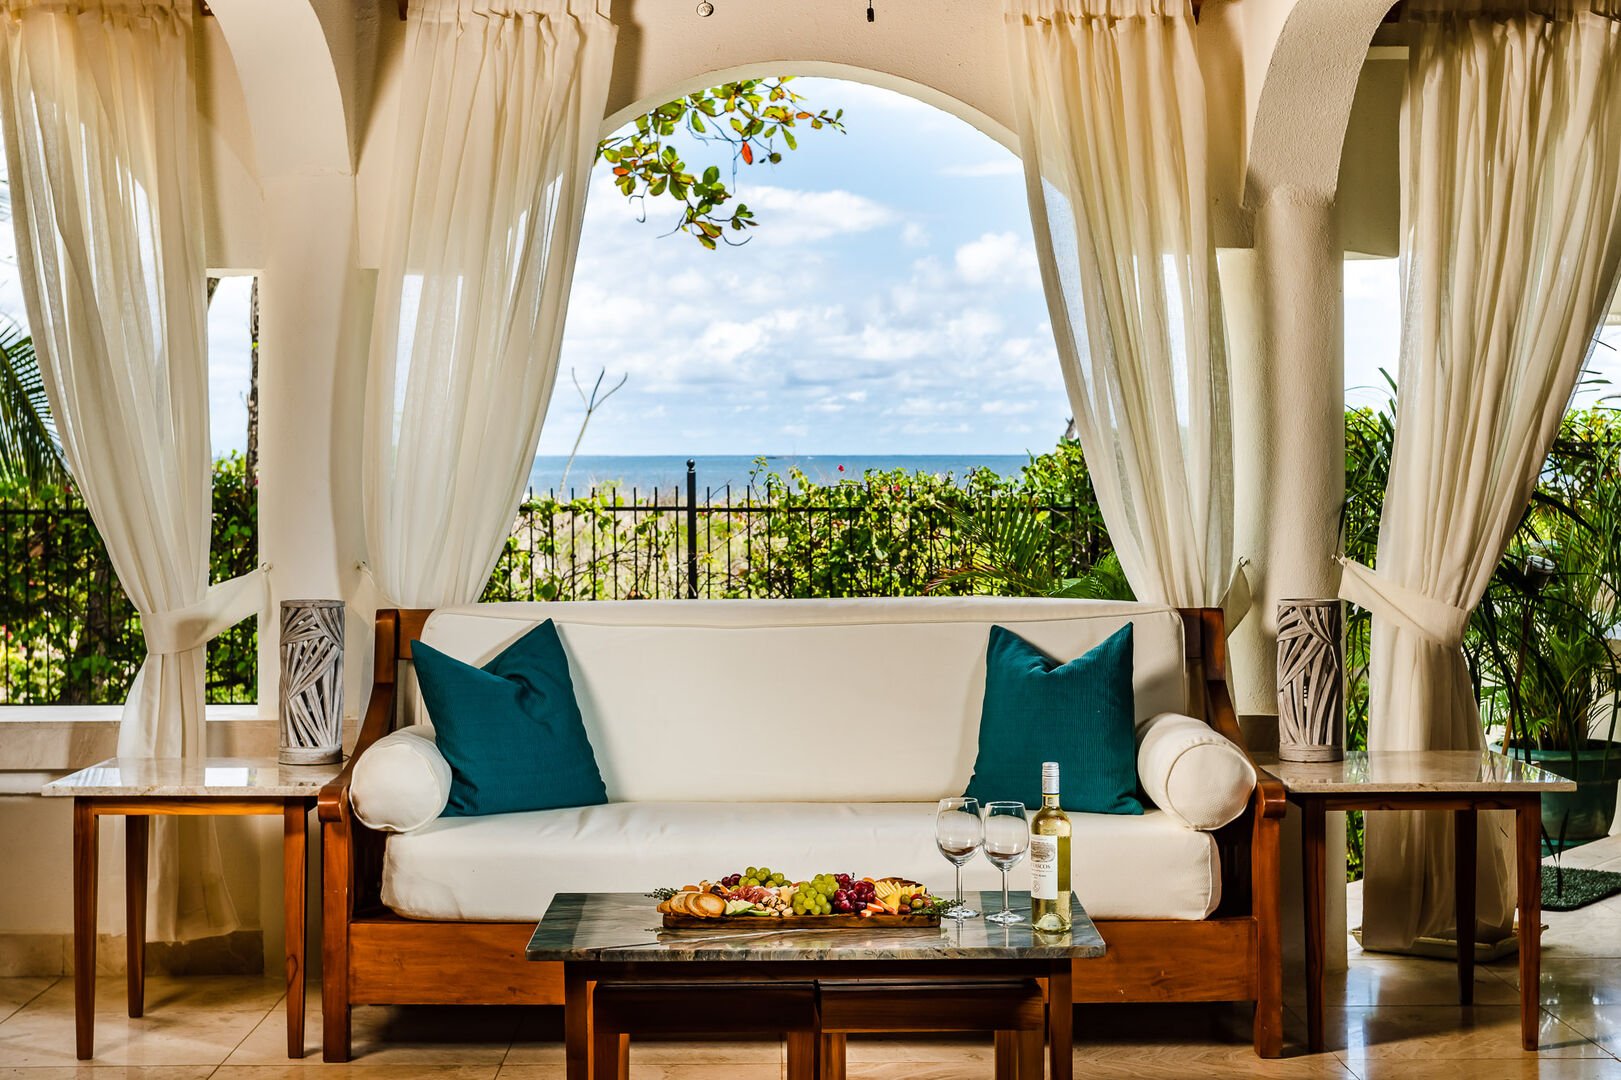 Relax in comfort with a view that's simply magnificent.